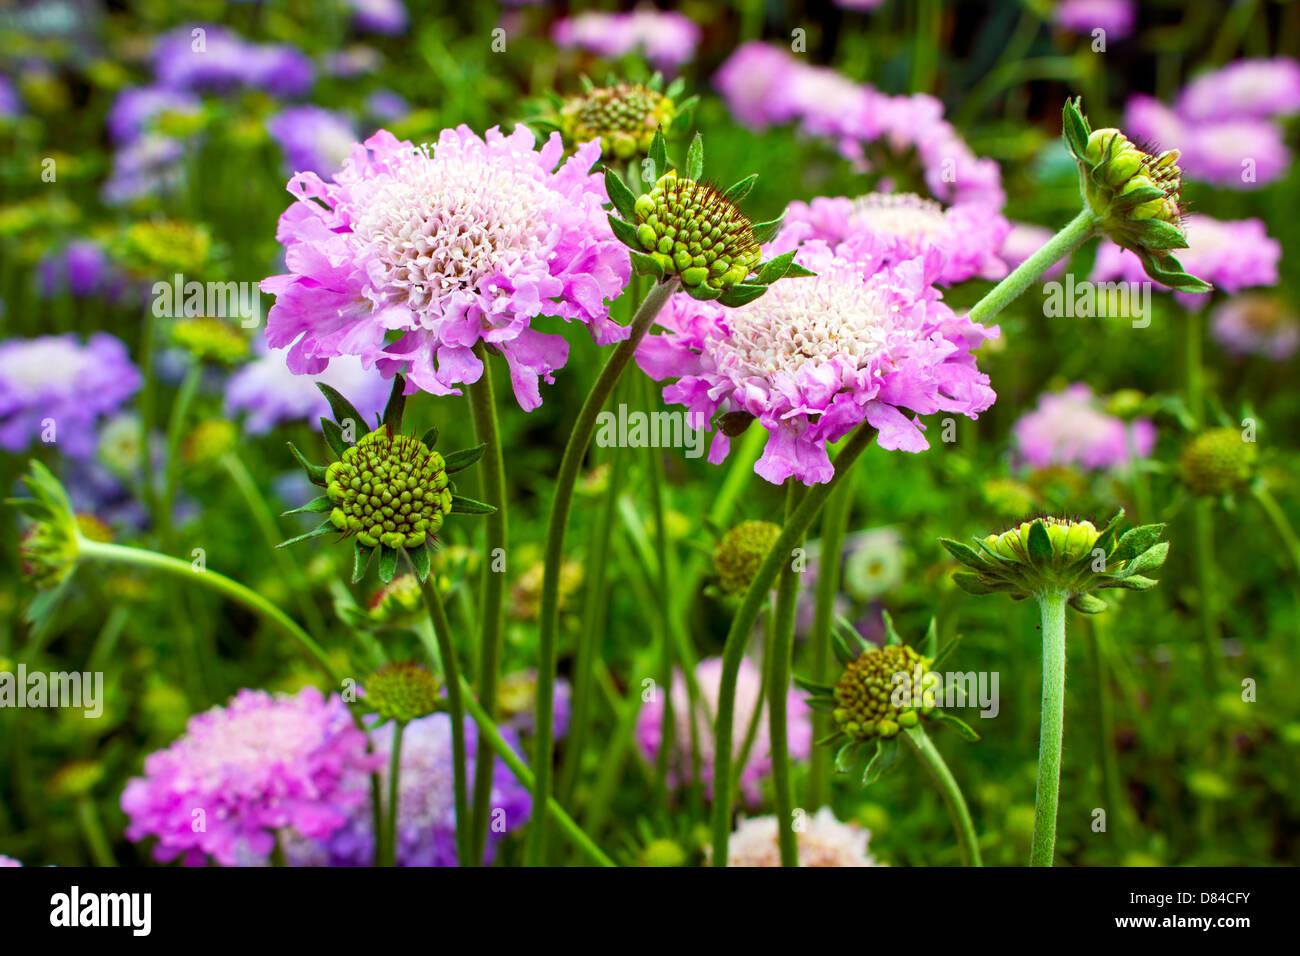 Scabious plant Scabiosa columbaria 'Pink Mist' in a garden. Stock Photo